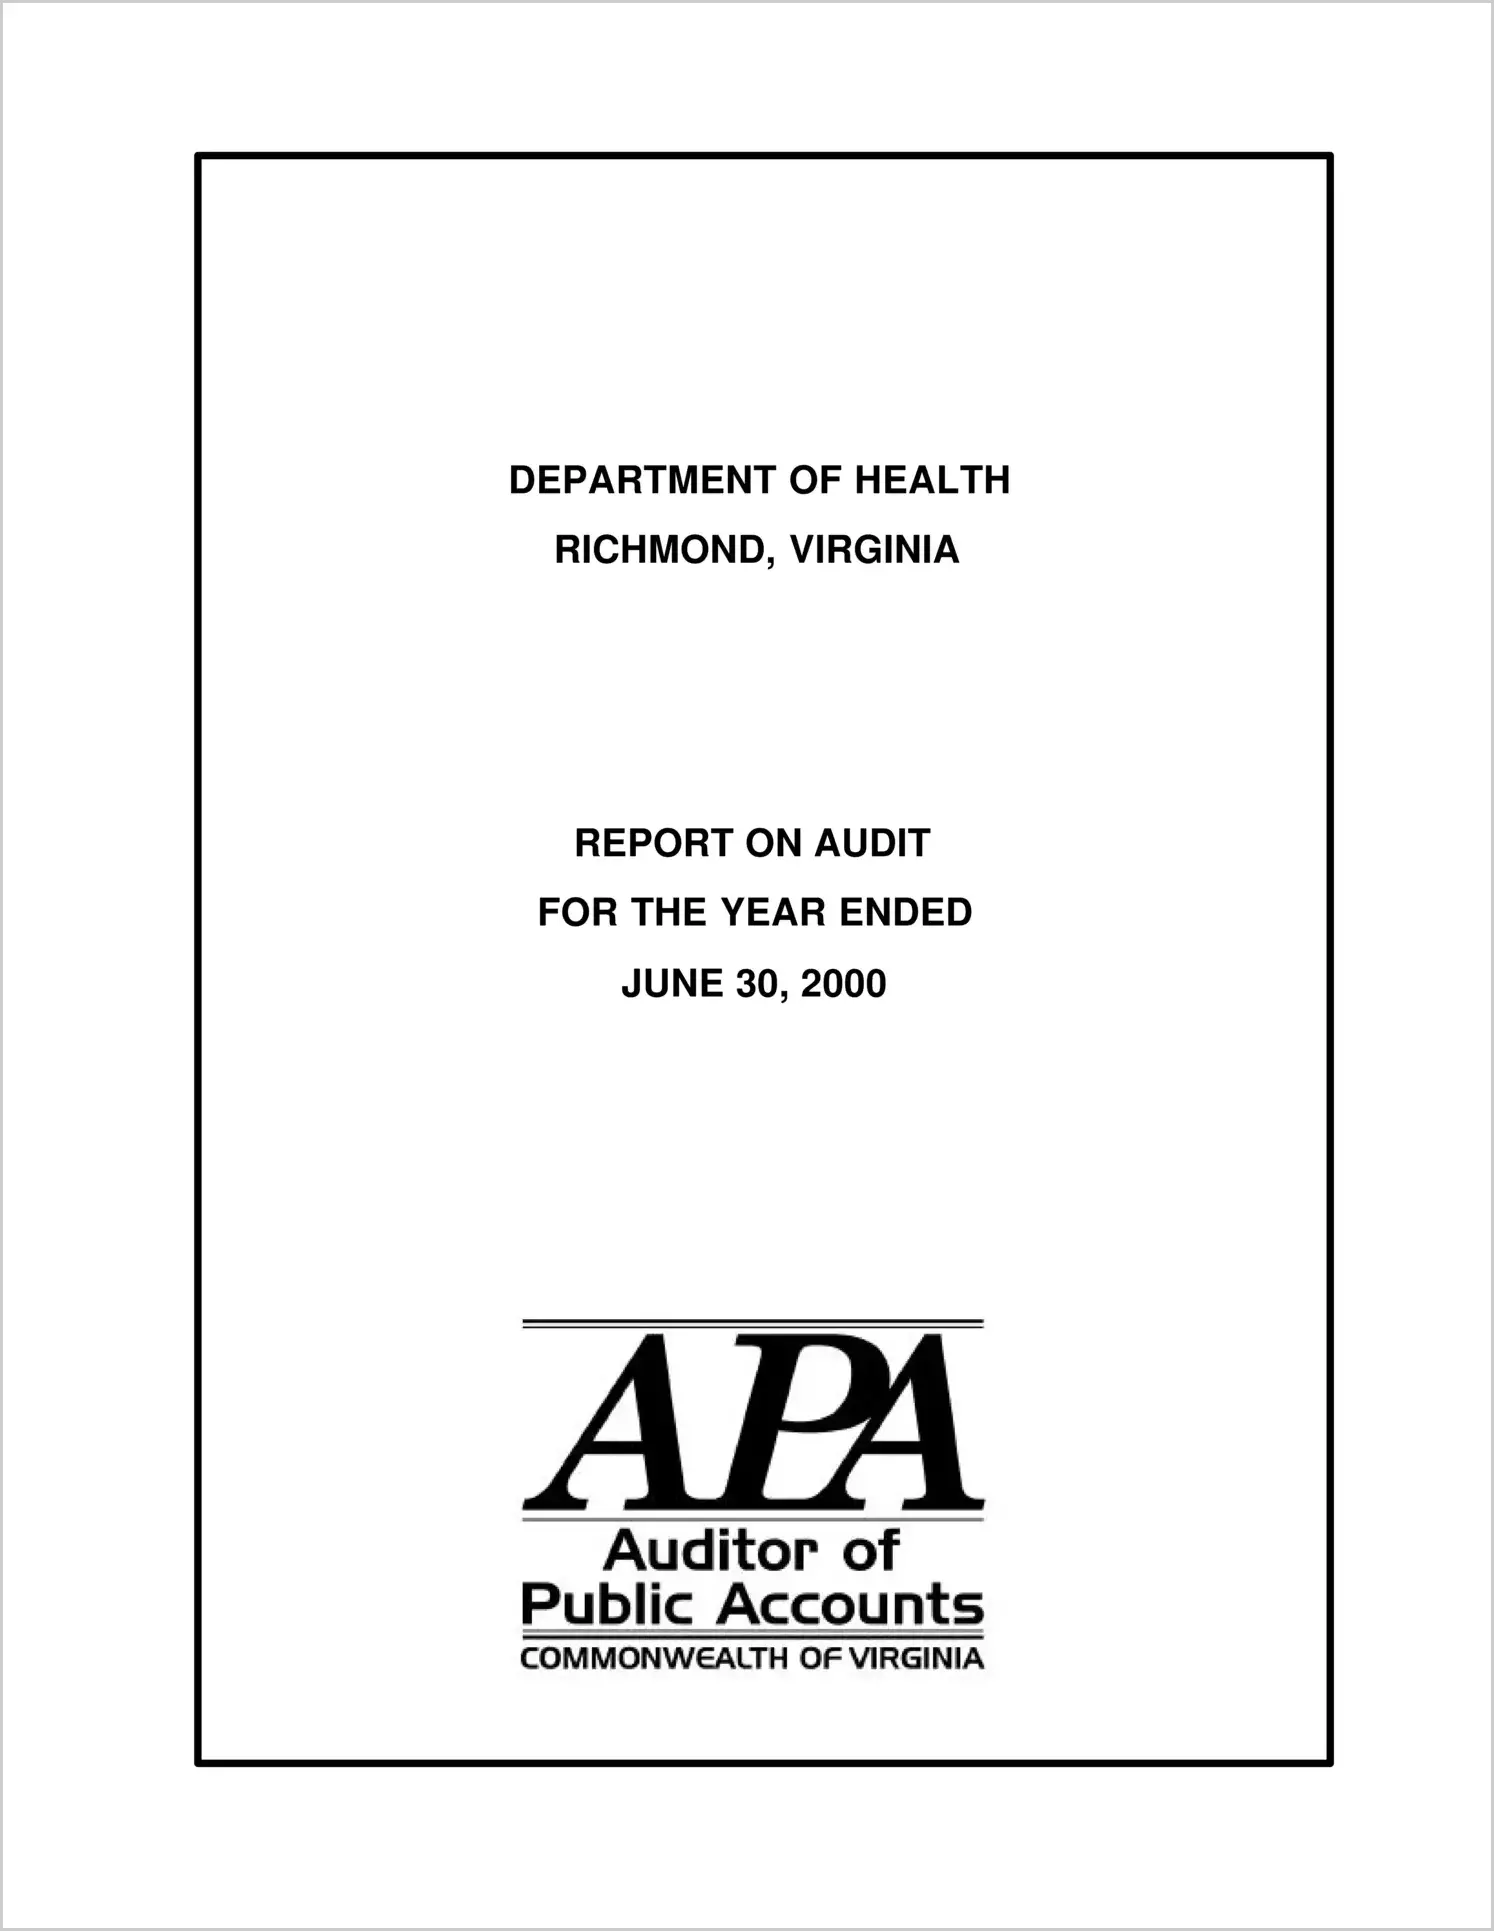 Department of Health for the year ended June 30, 2000